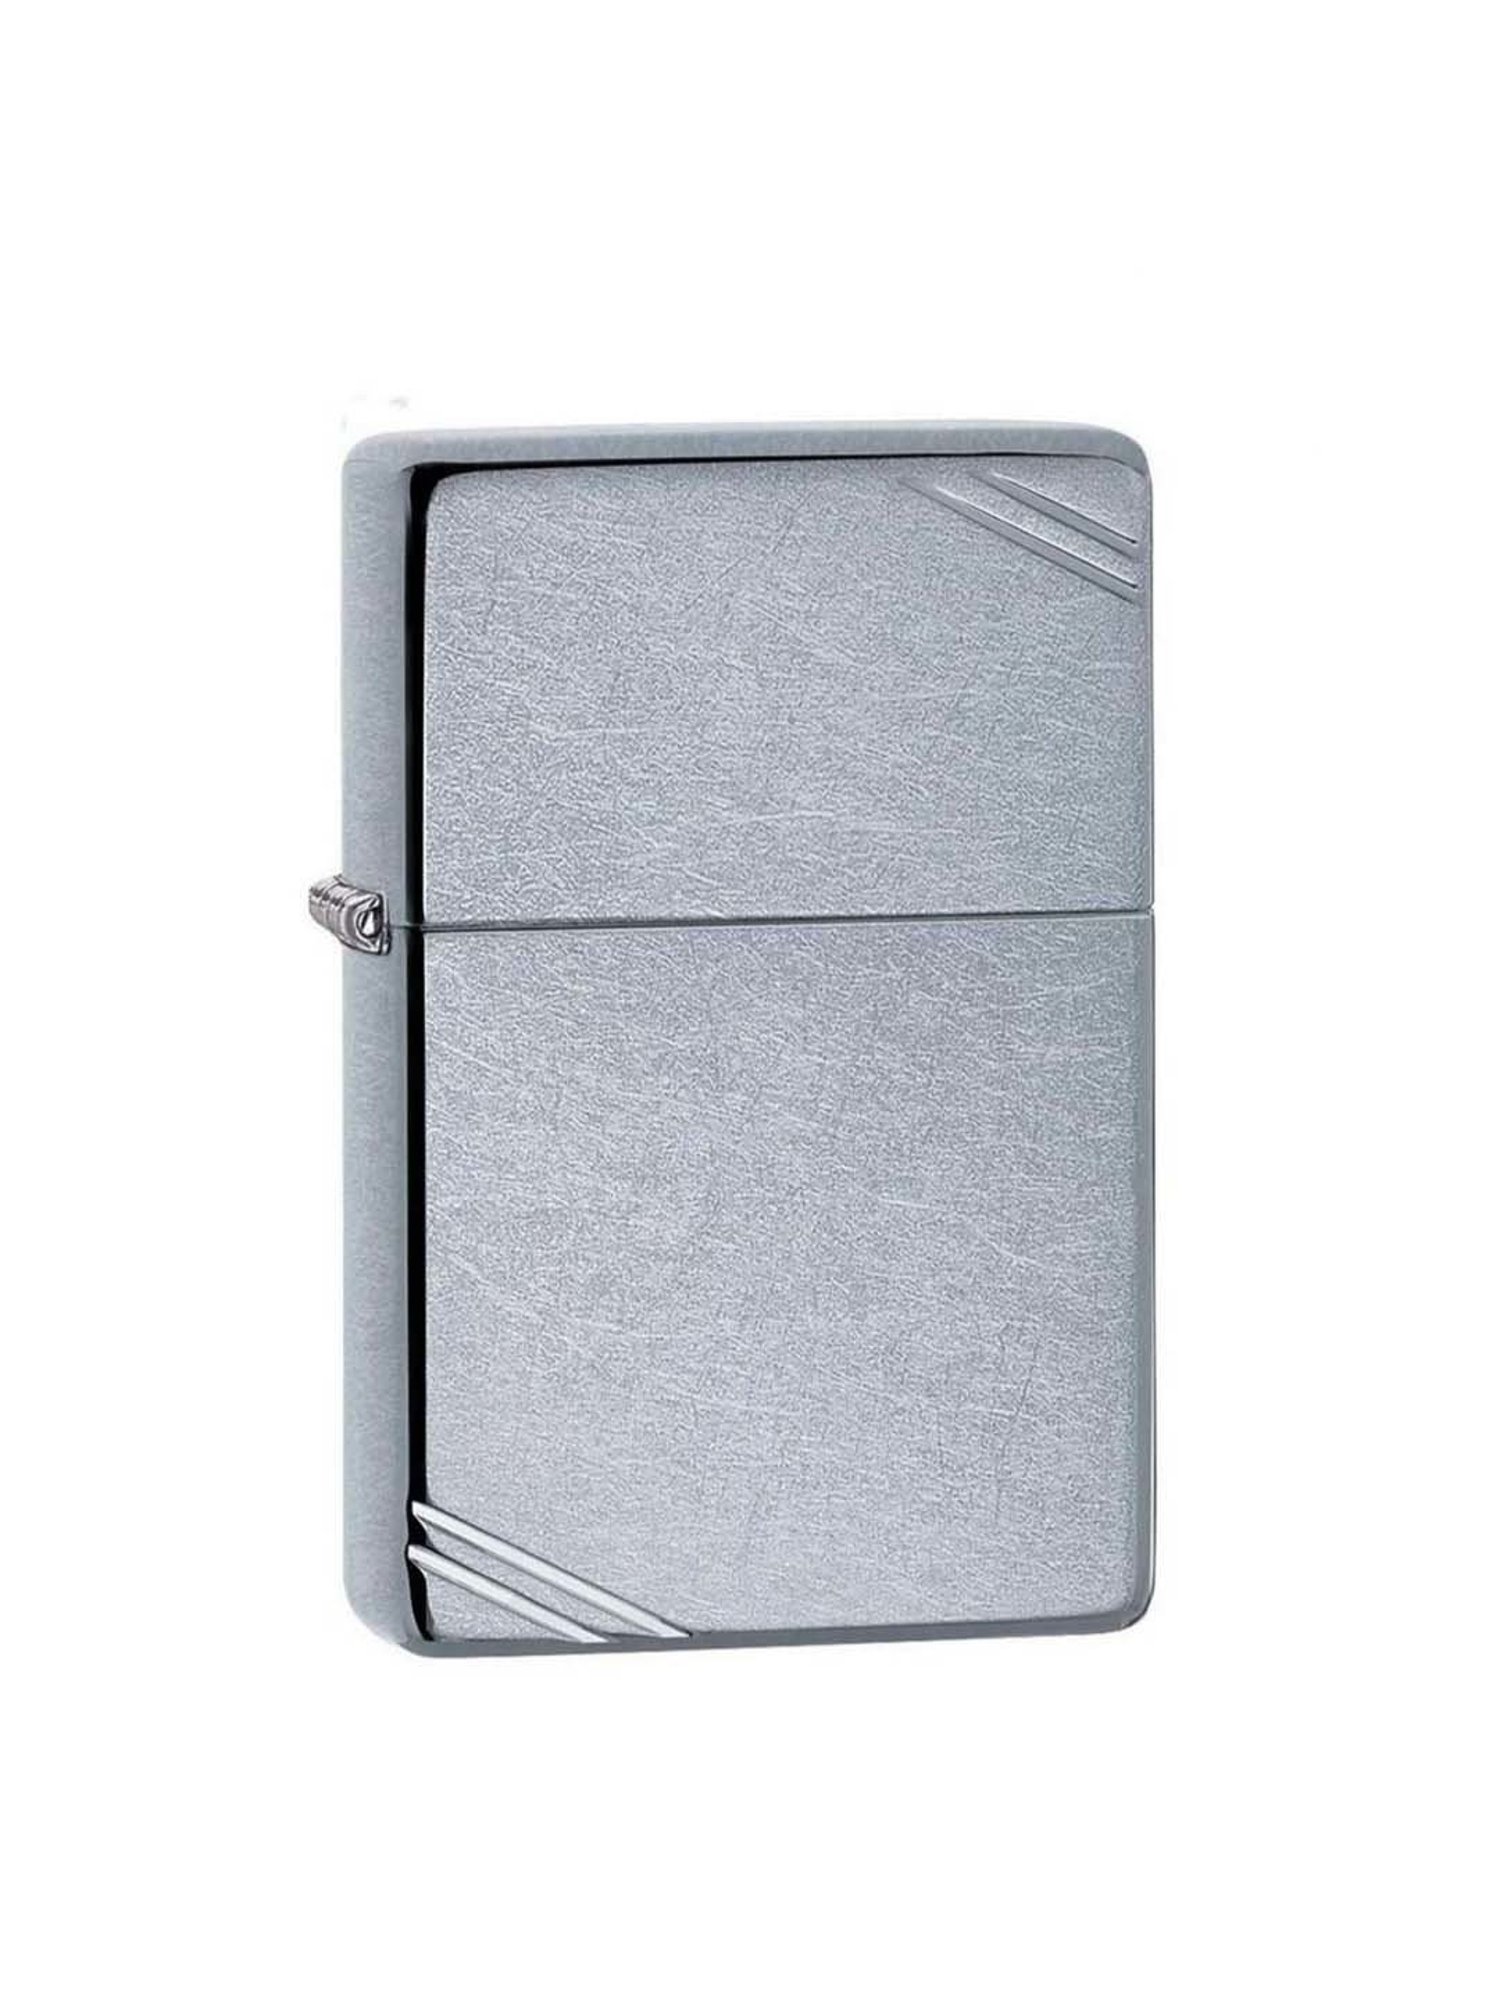 Buy Combo of Zippo Vintage with Slashes Street Chrome Windproof